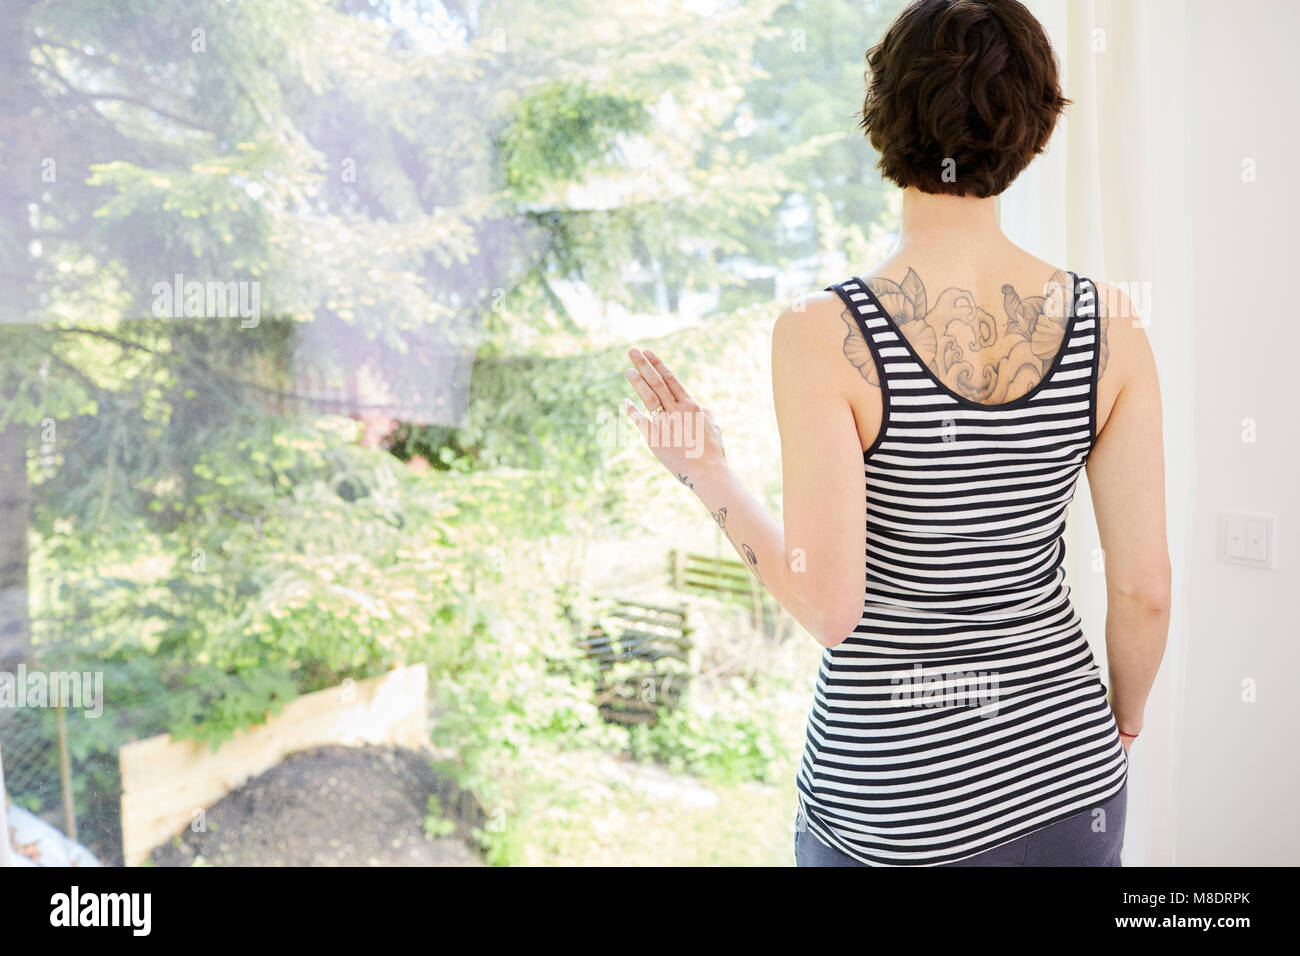 Mid adult woman, at home, looking out of window, rear view Stock Photo